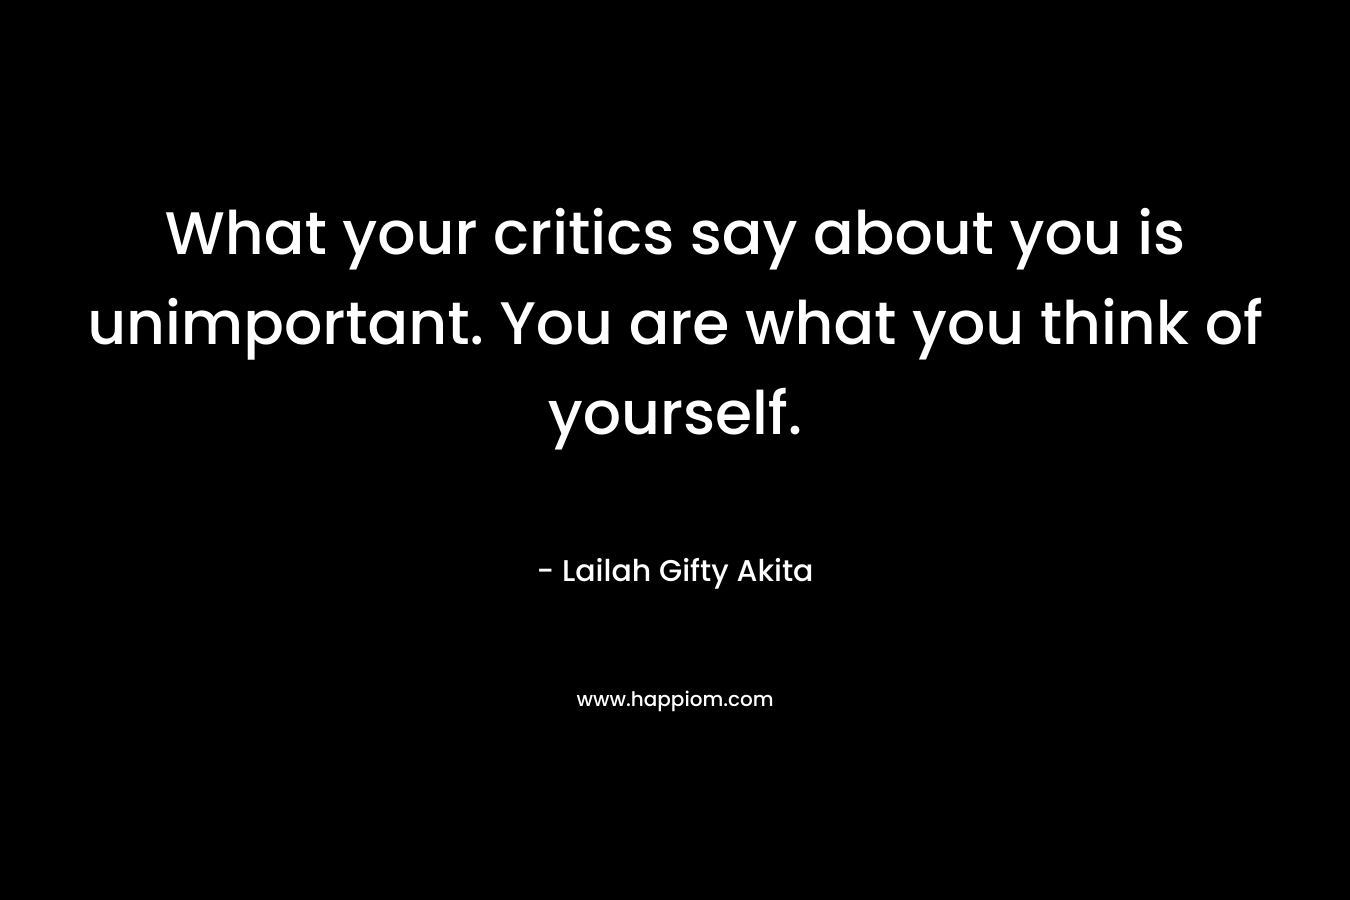 What your critics say about you is unimportant. You are what you think of yourself. – Lailah Gifty Akita